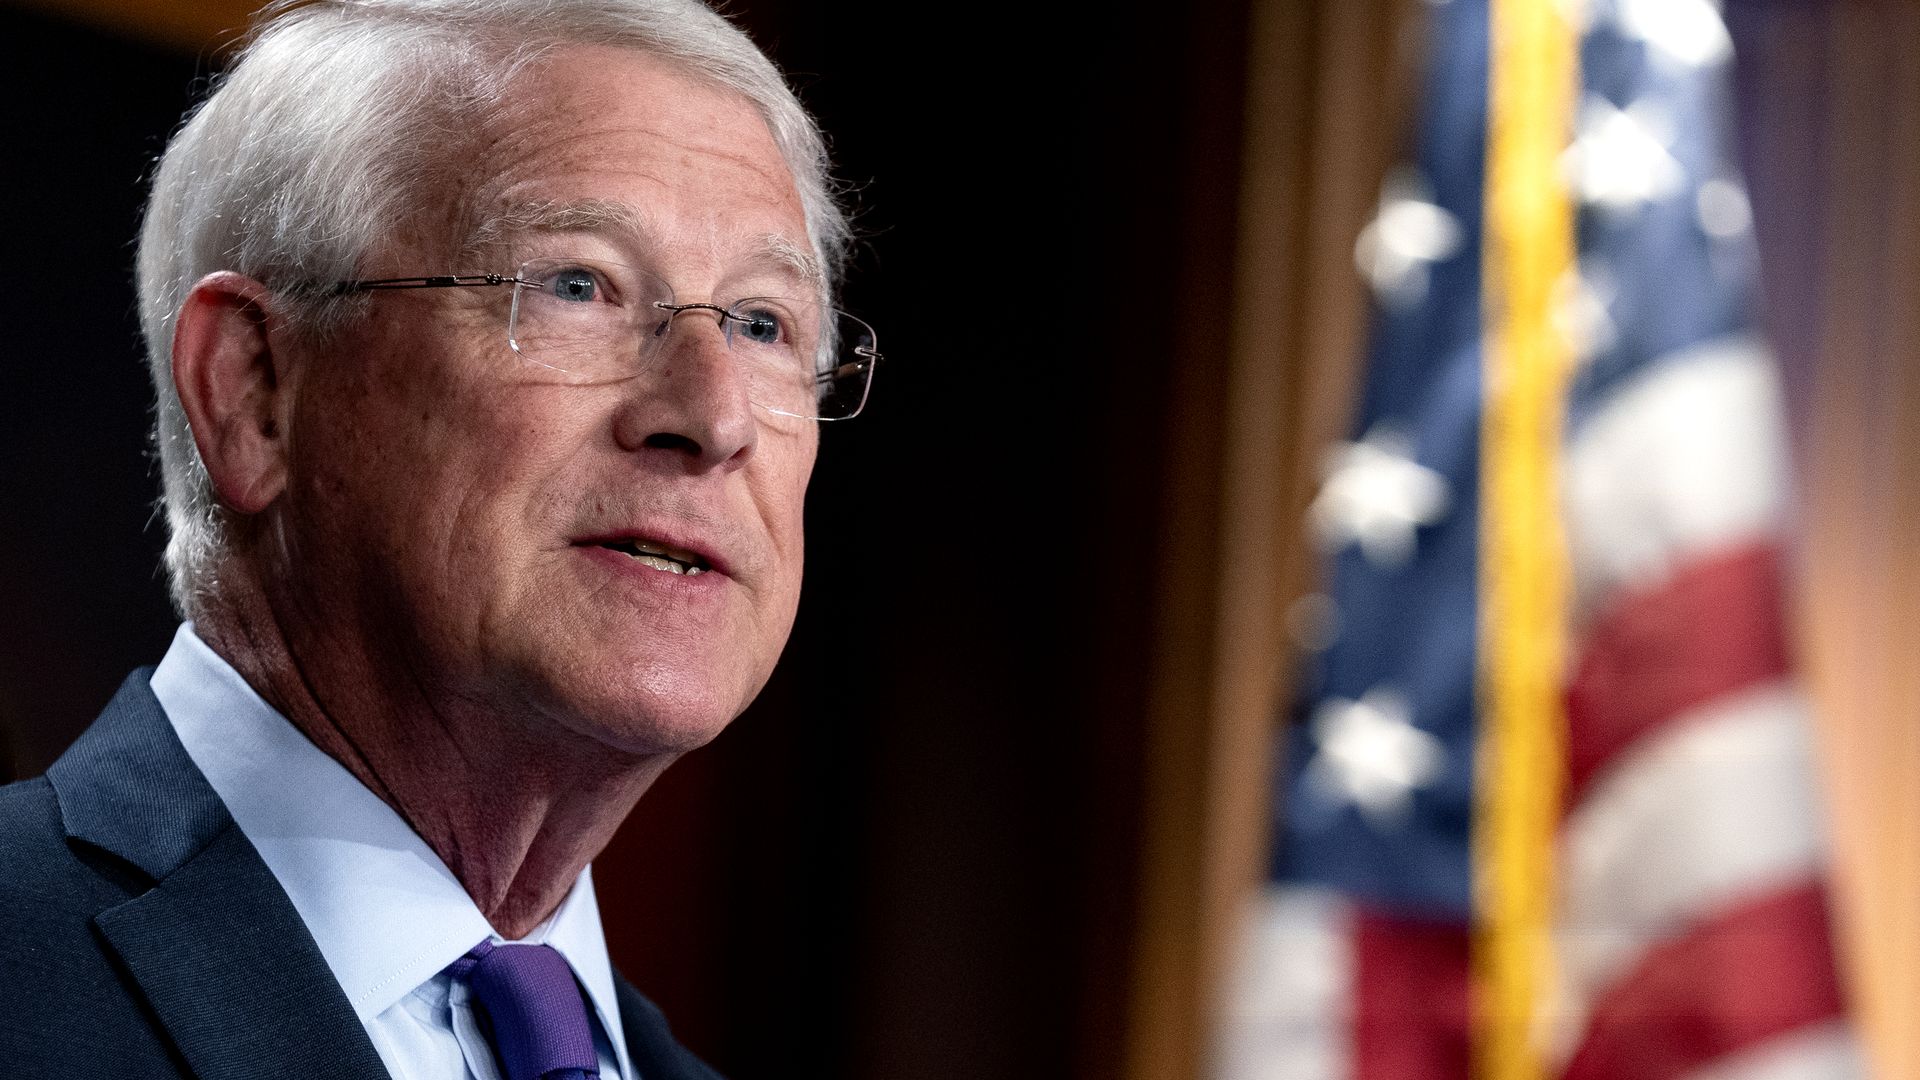 Sen. Roger Wicker of Mississippi is seen speaking during a news conference.